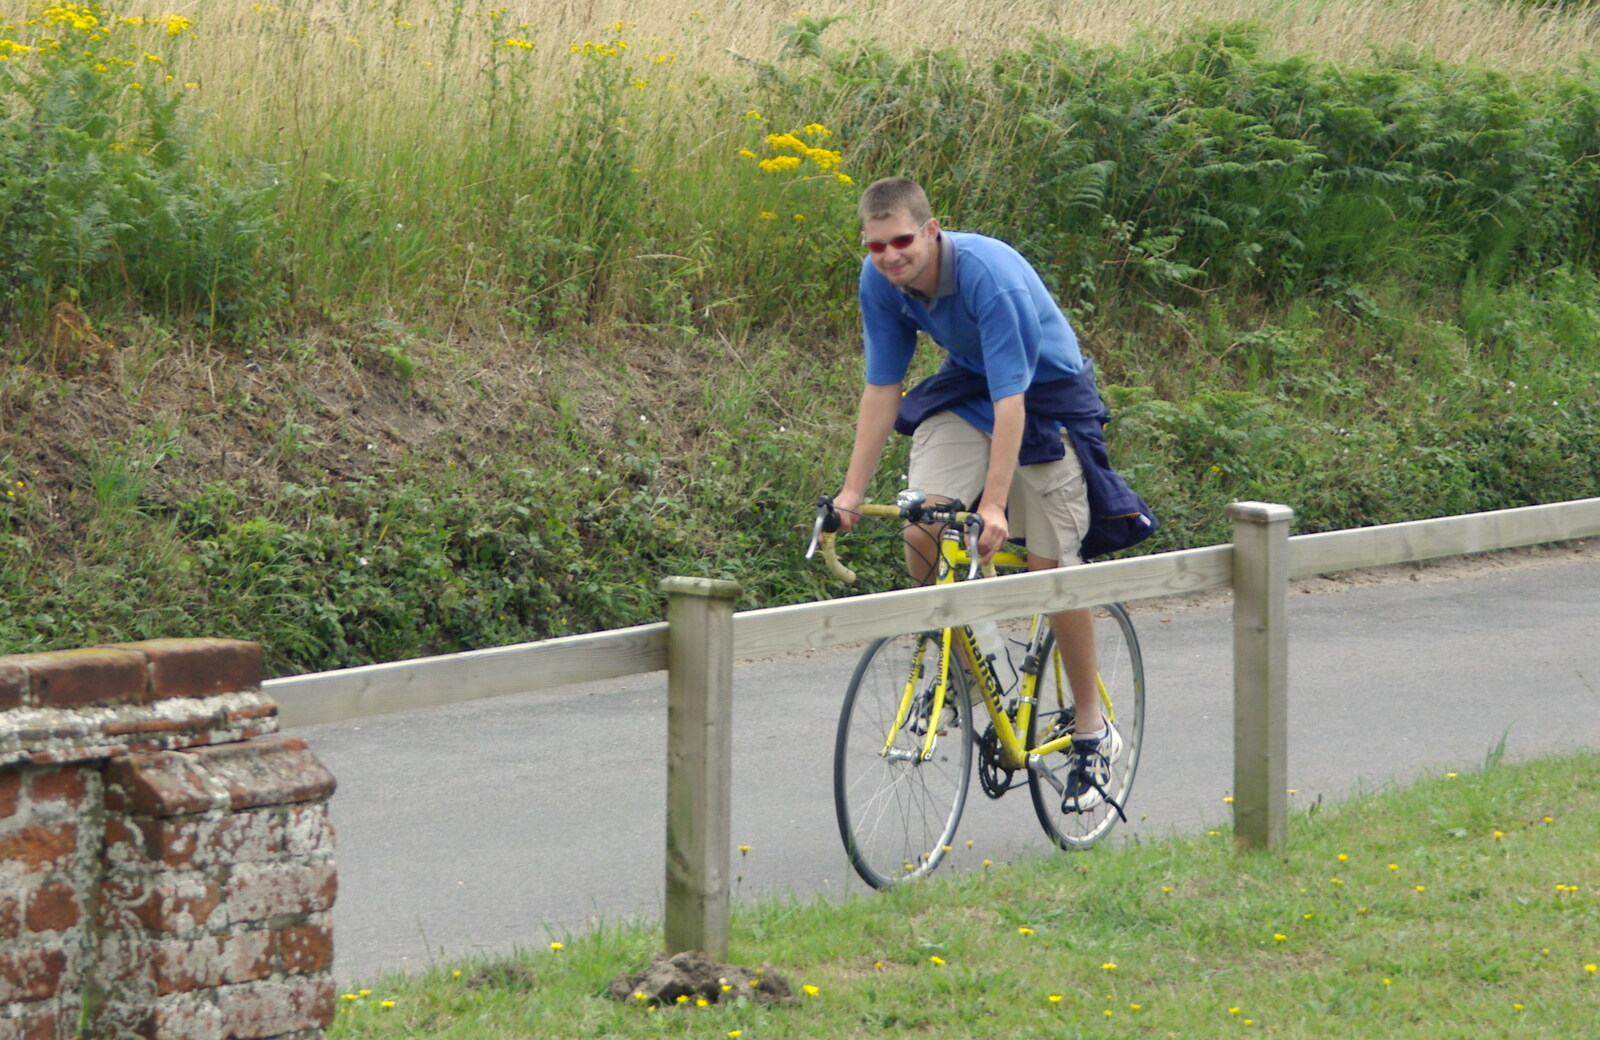 The Boy Phil on his bike from The BSCC Charity Bike Ride, Walberswick, Suffolk - 9th July 2005